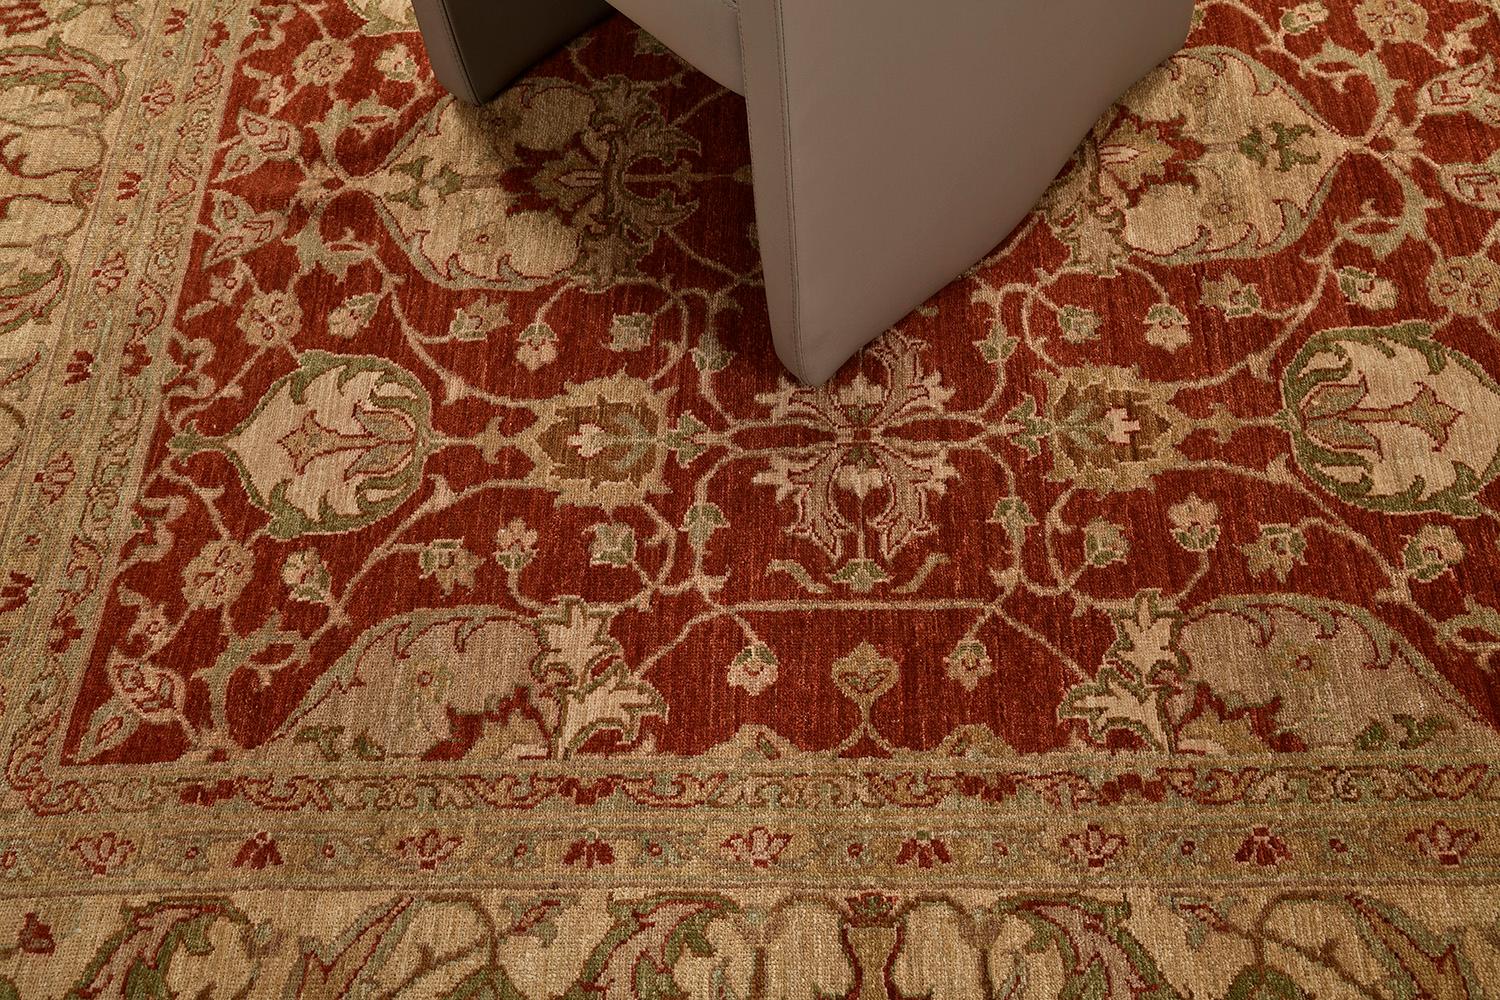 This mesmerizing Oushak design from our collection is the definition of perfection, elegance, and refinement. It features dazzling details in gold red. Breath-taking symmetric leafy tendrils and scrolls, and sets of florets,  that makes the carpet